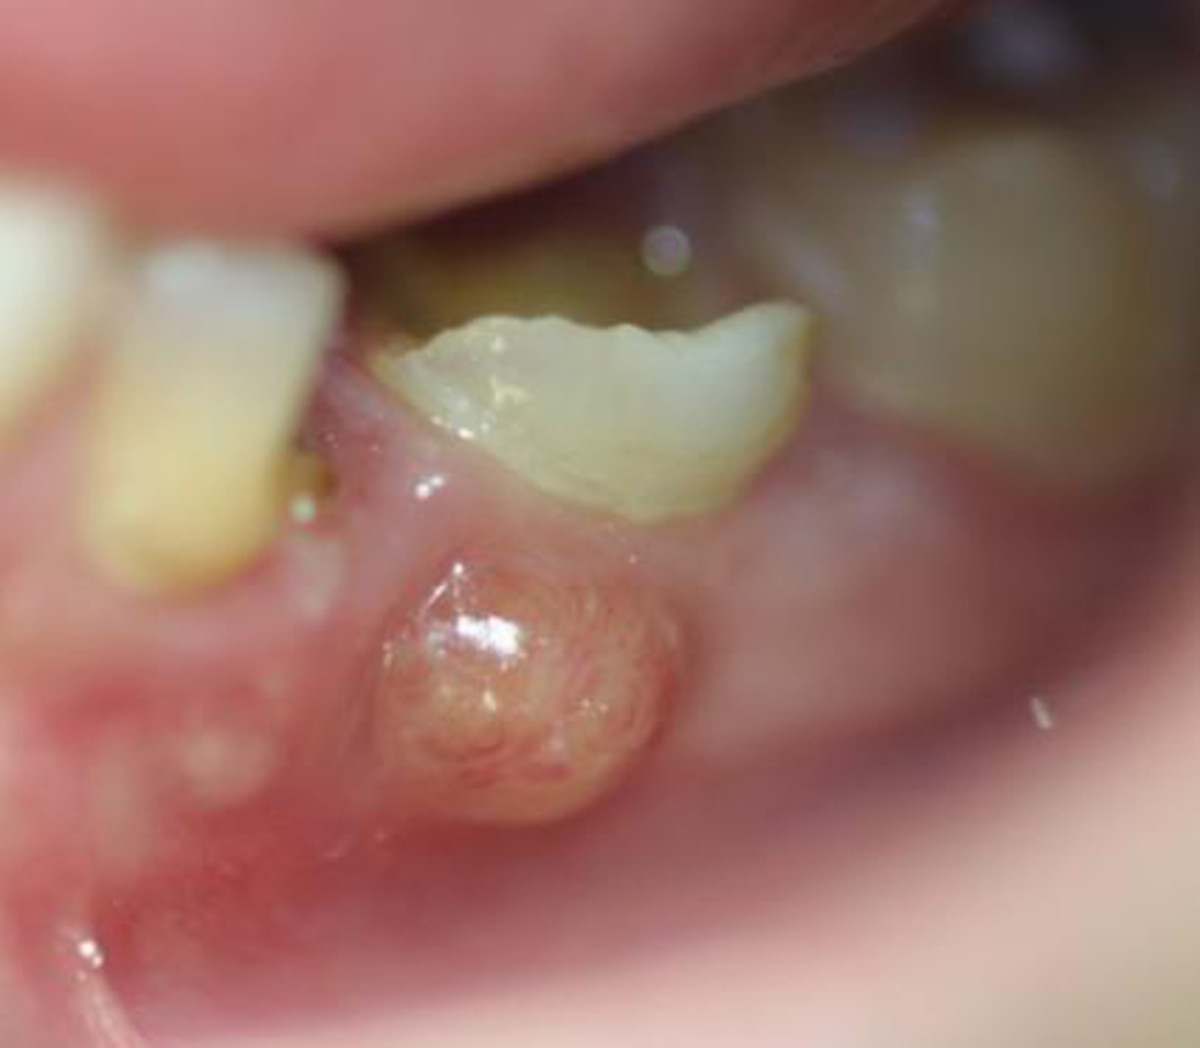 A  broken down tooth with abscess and draining pus